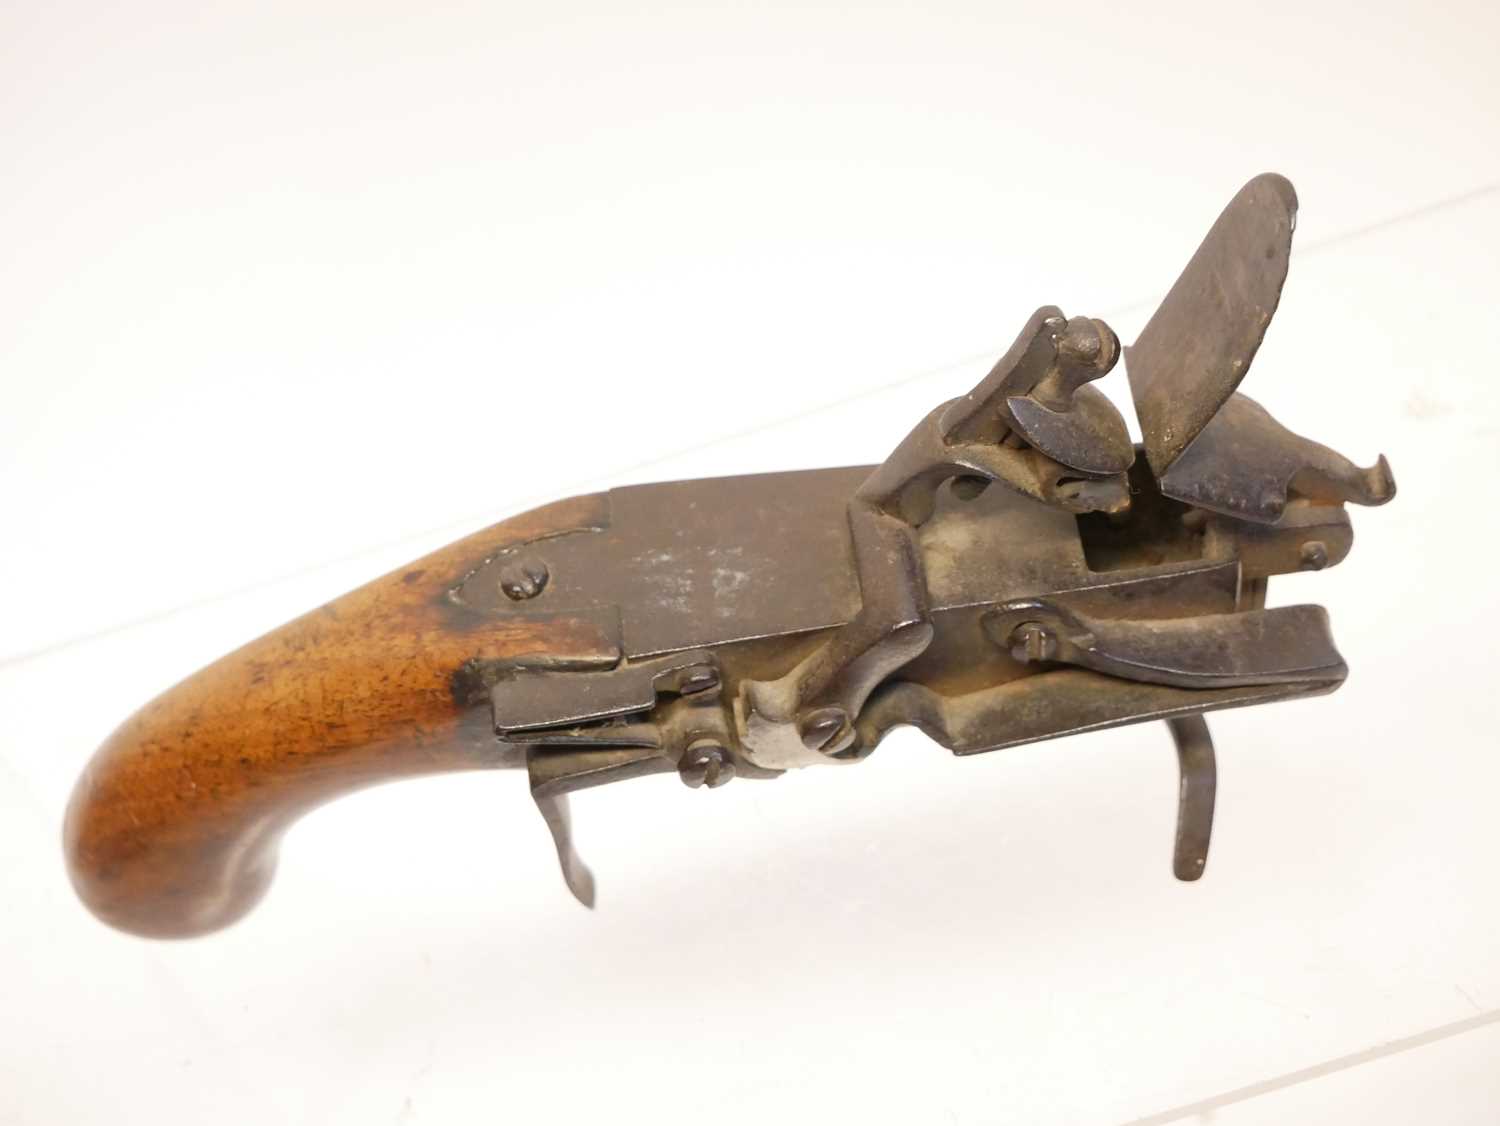 Flintlock tinder box lighter, with exposed action and wood pistol grip stock. 21cm long The - Image 2 of 5